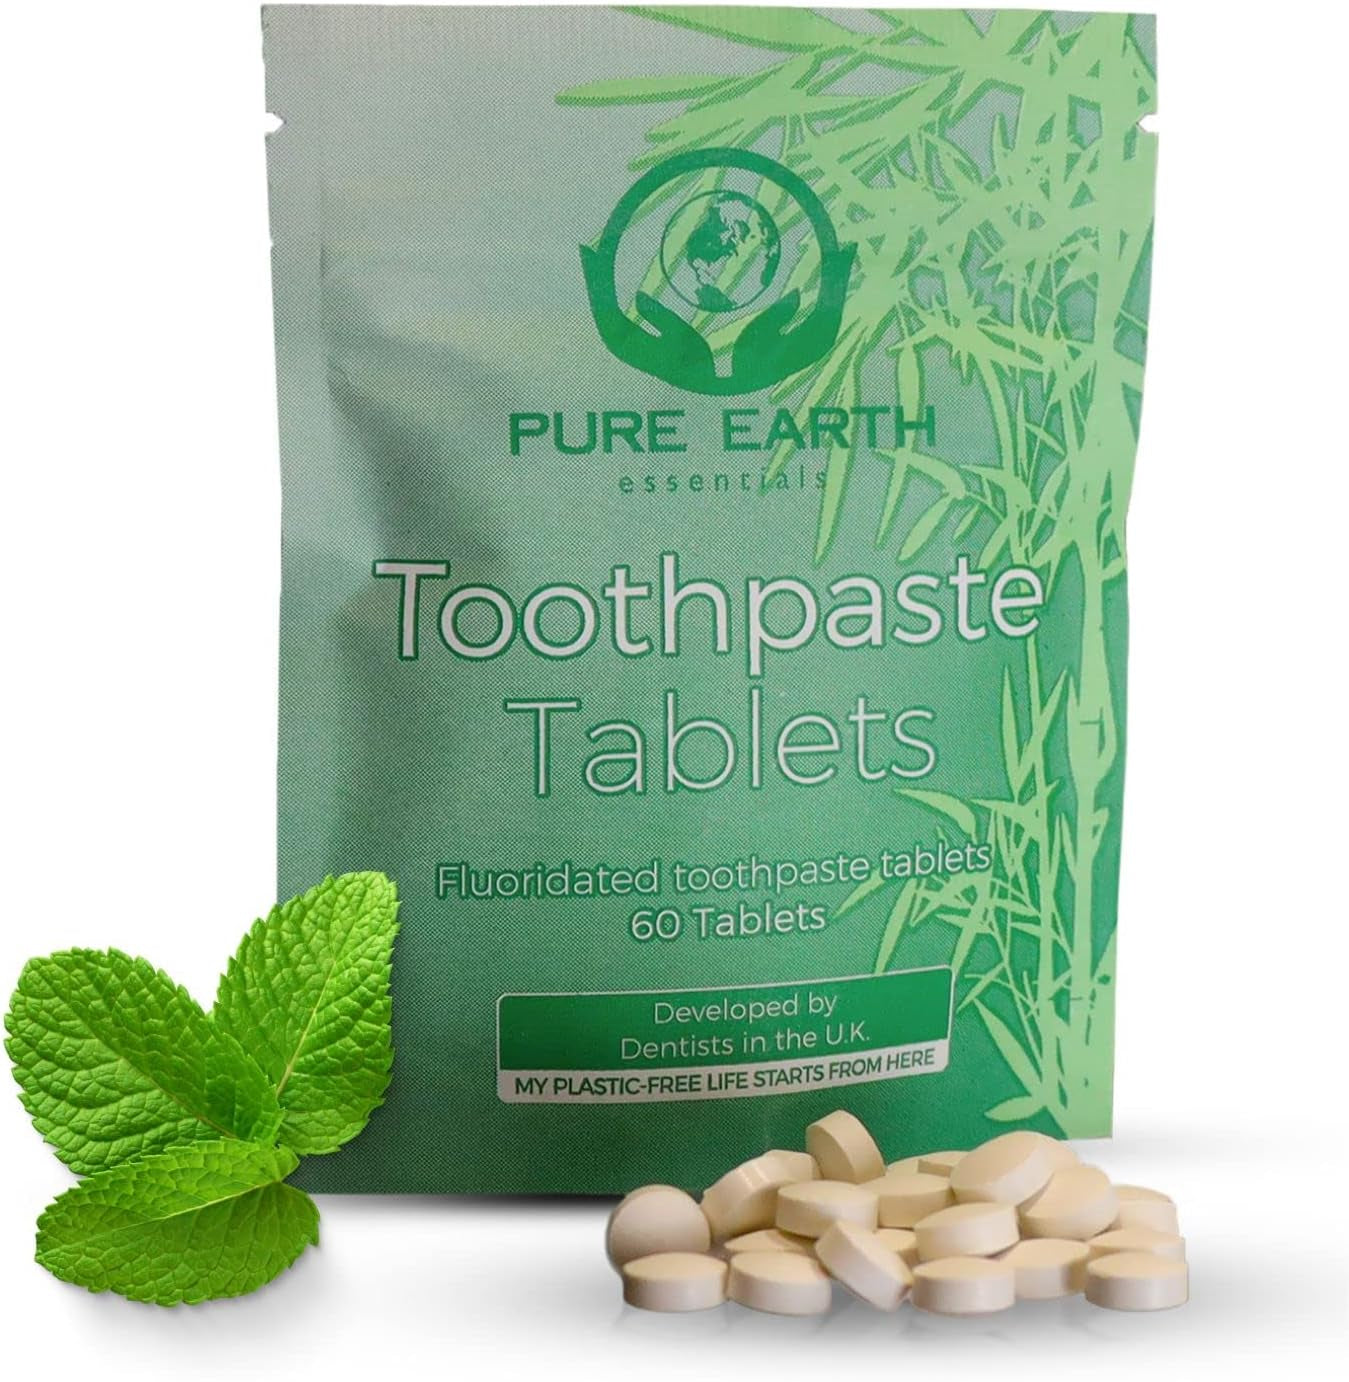 Zero Waste Toothpaste Tablets with Fluoride - Vegan & Eco Friendly Travel Toothpaste Tablets for Healthy Teeth & Fresh Breath - 60 Count by